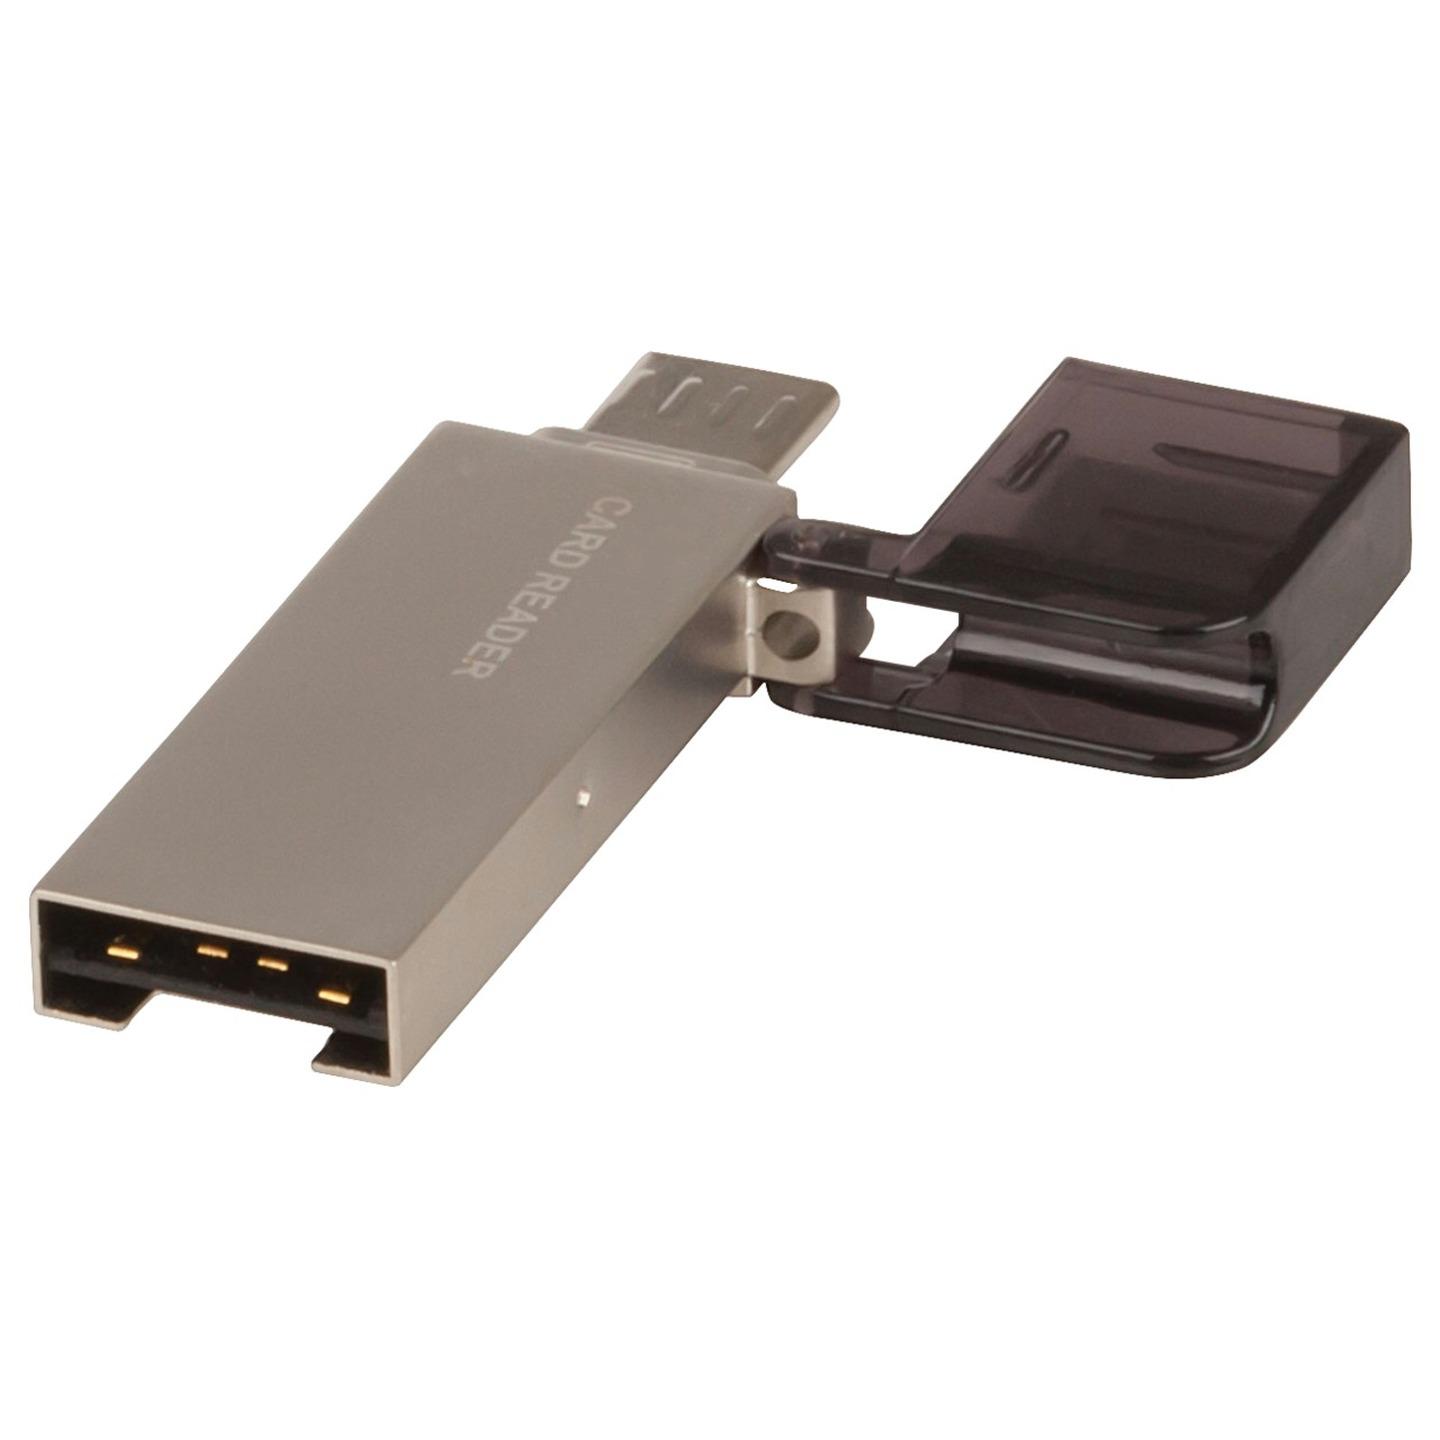 OTG USB Micro USB Card Reader Suits Android Devices